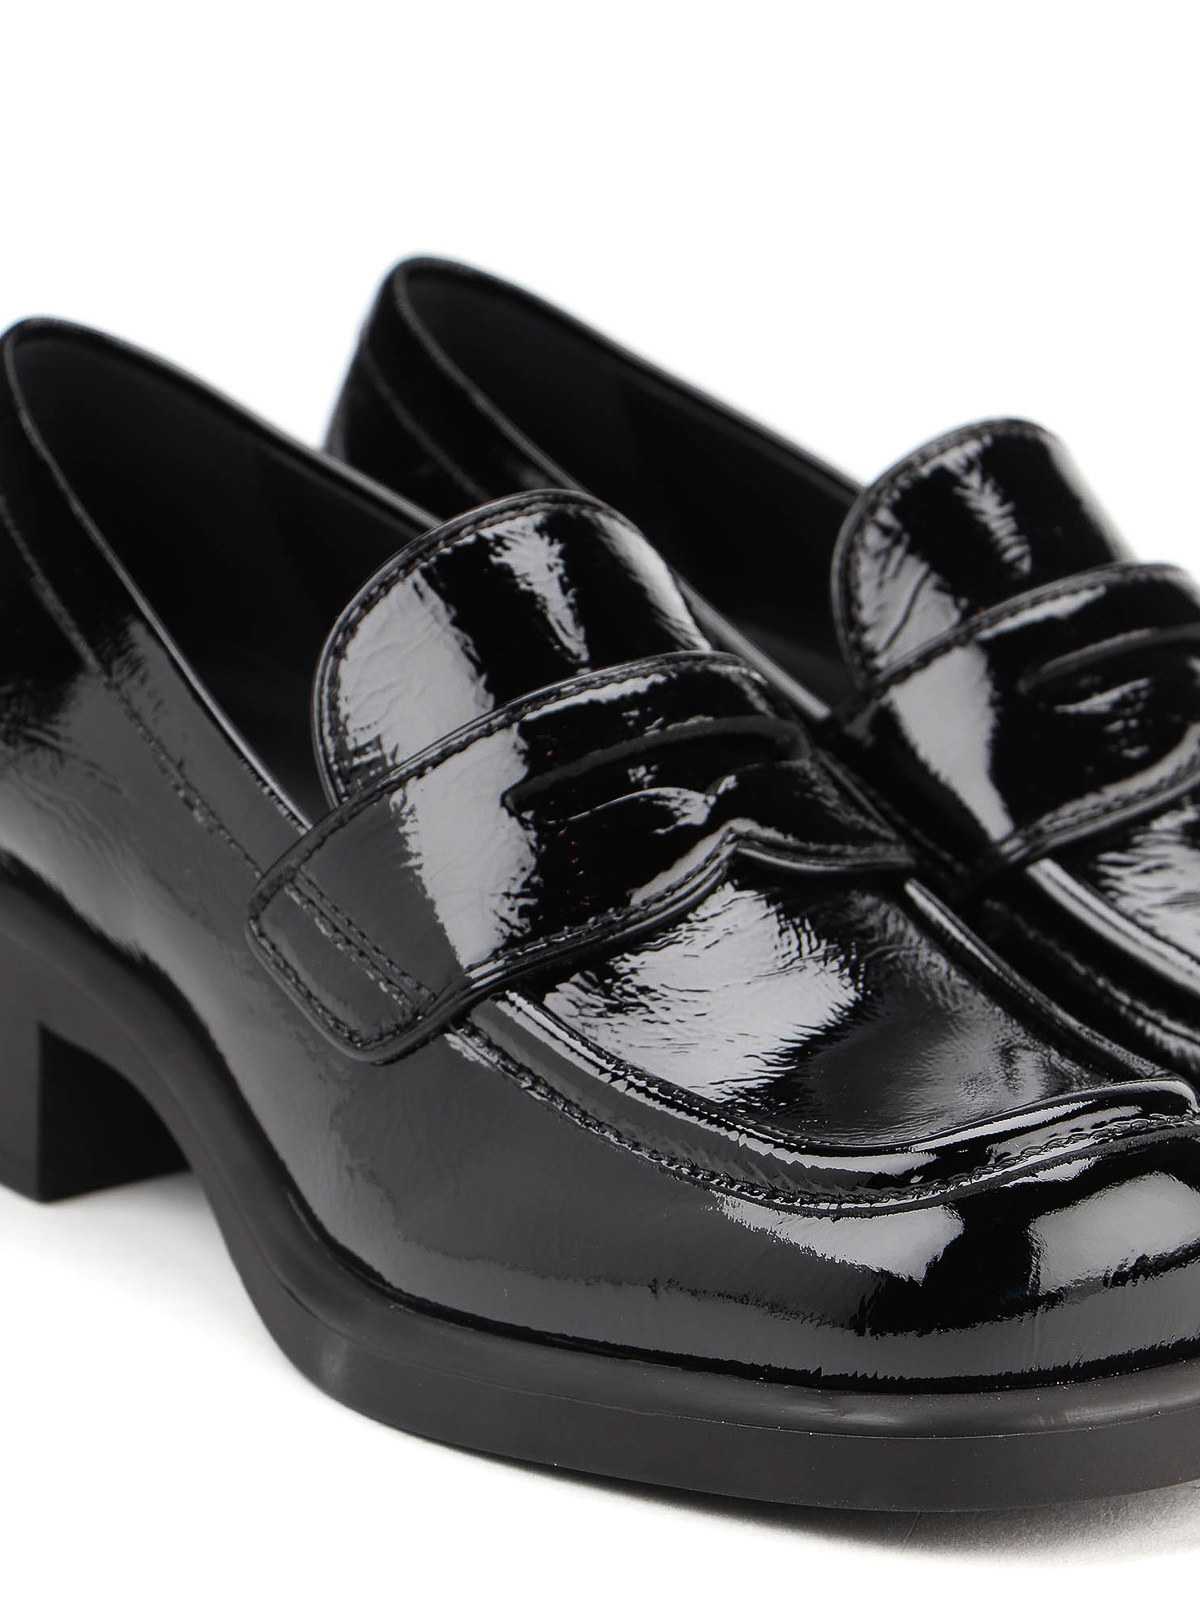 Loafers & Slippers Miu Miu - Patent leather loafers 